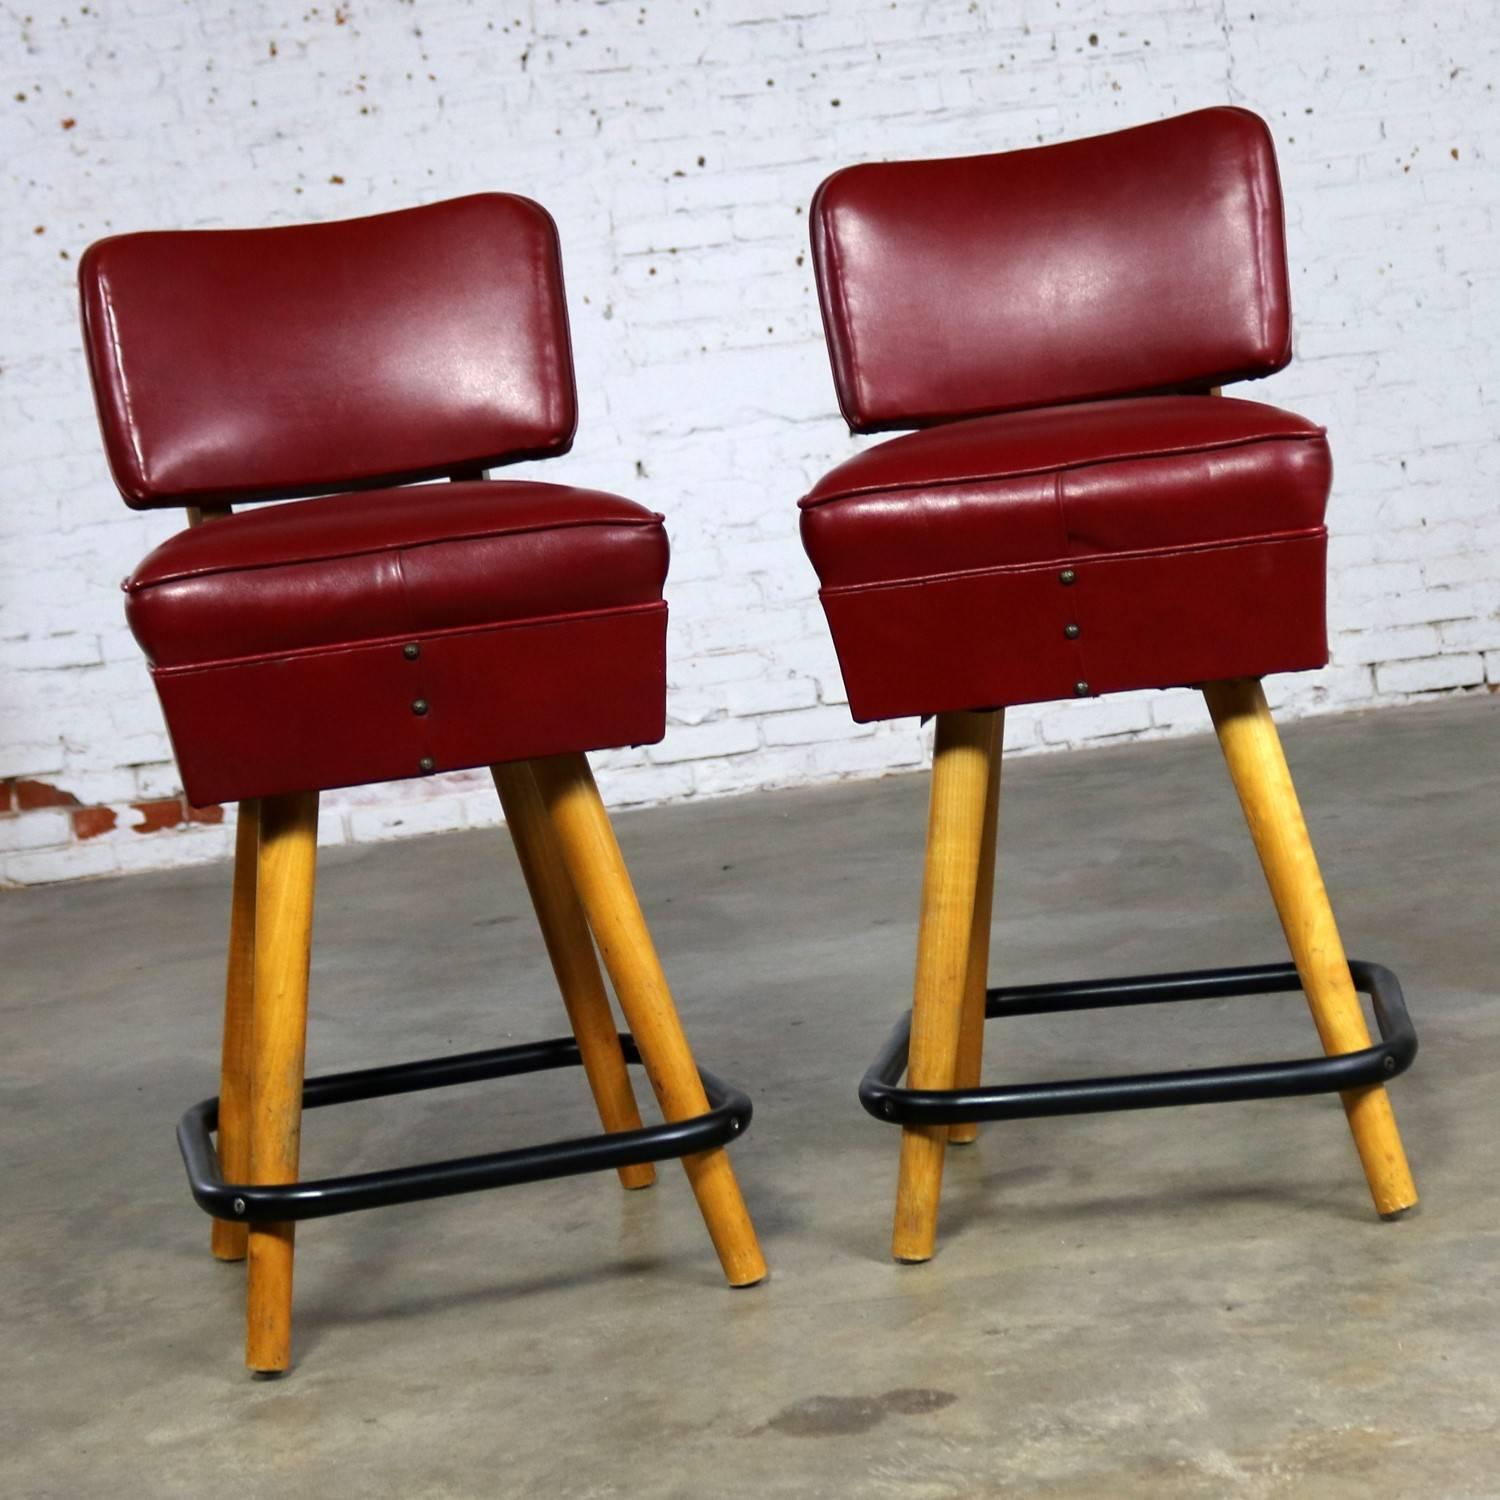 Awesome pair of midcentury counter height bistro bar stools in a deep read vinyl faux leather and blonde wood legs made by WCI aka West Coast Industries. These barstools are in excellent vintage condition apart from a three-corner tear in the